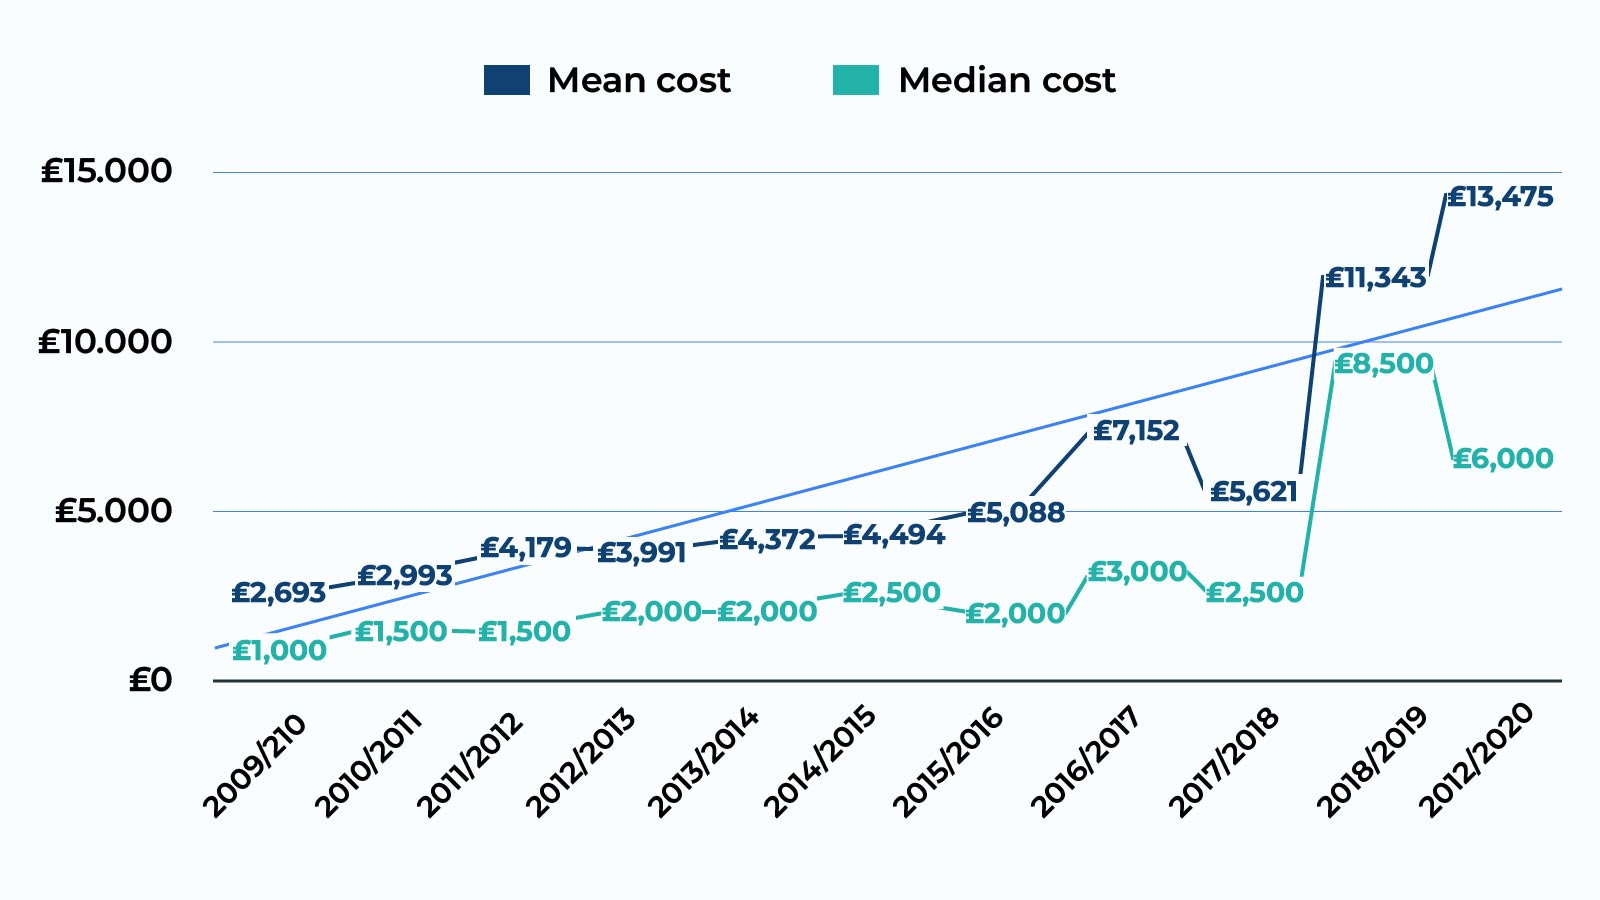 Mean and median costs across time